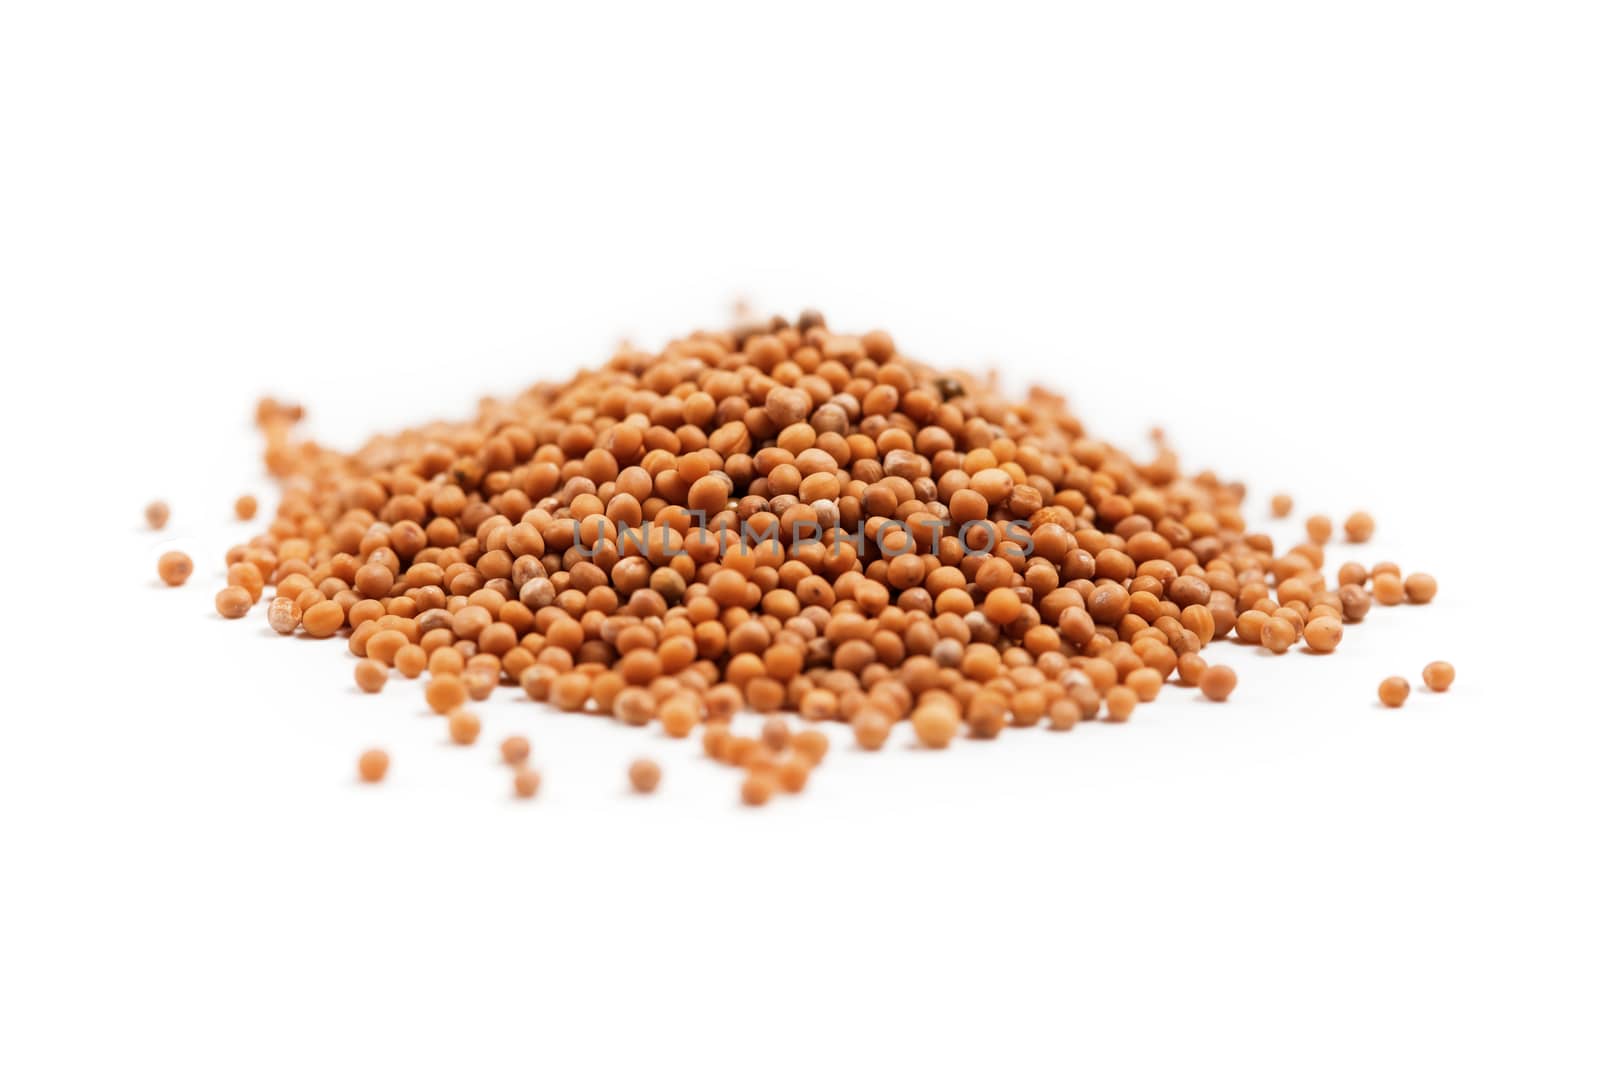 White mustard seeds for germination in heap isolated on a white background by galinasharapova